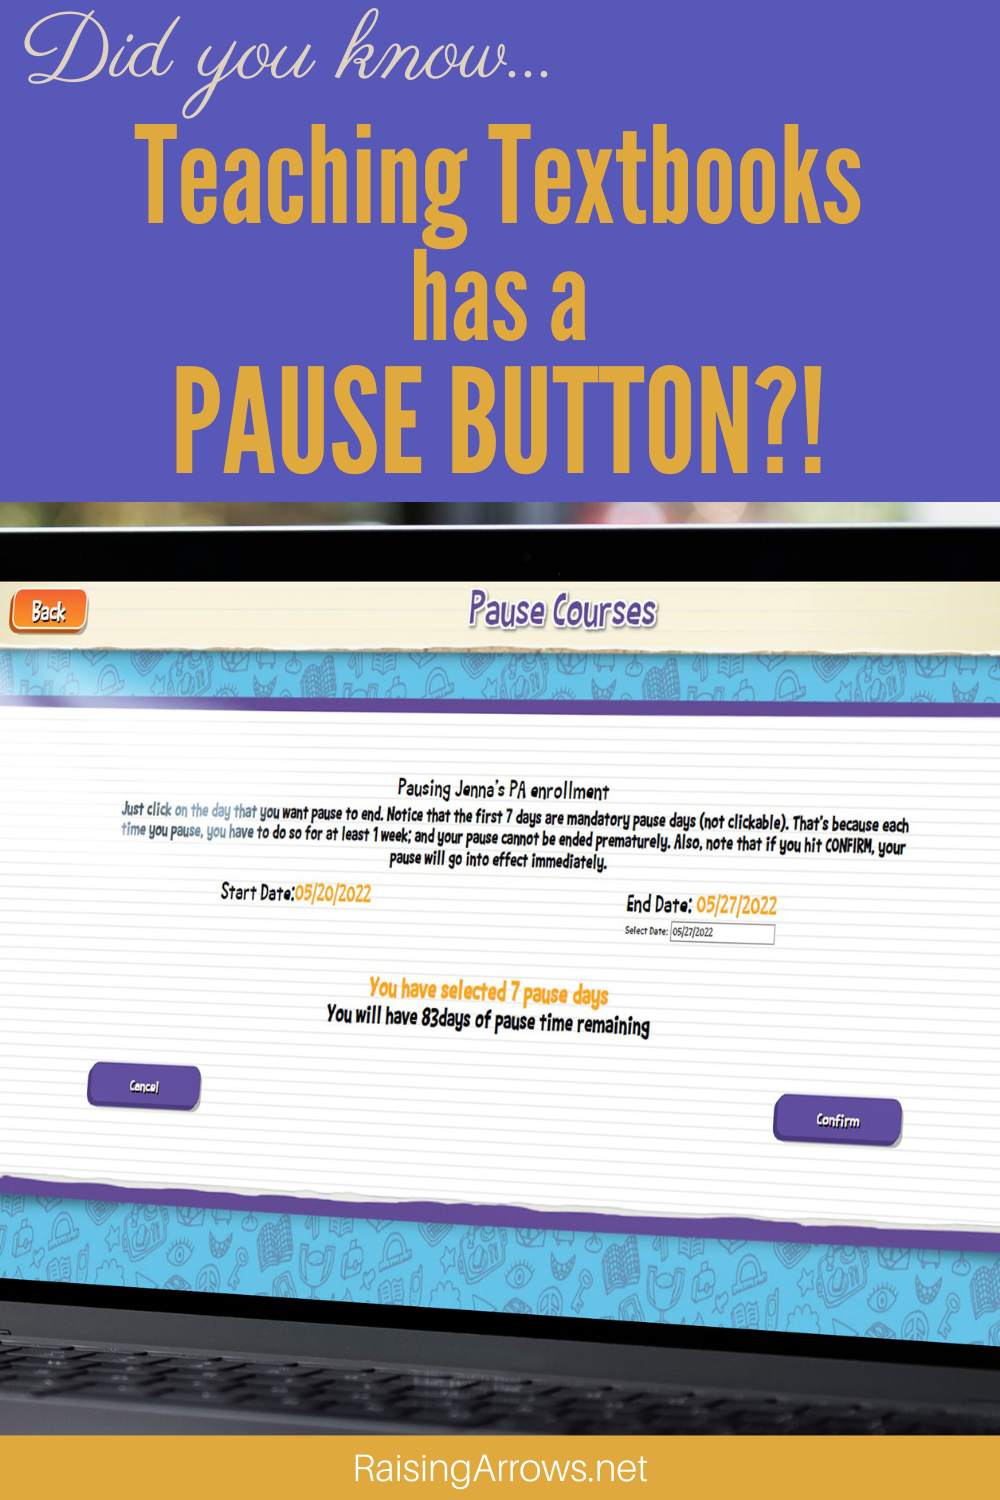 Did you know Teaching Textbooks has a Pause button to allow your student to take a break from math without counting against your 12 month access?  Let me share with you how we use this feature!